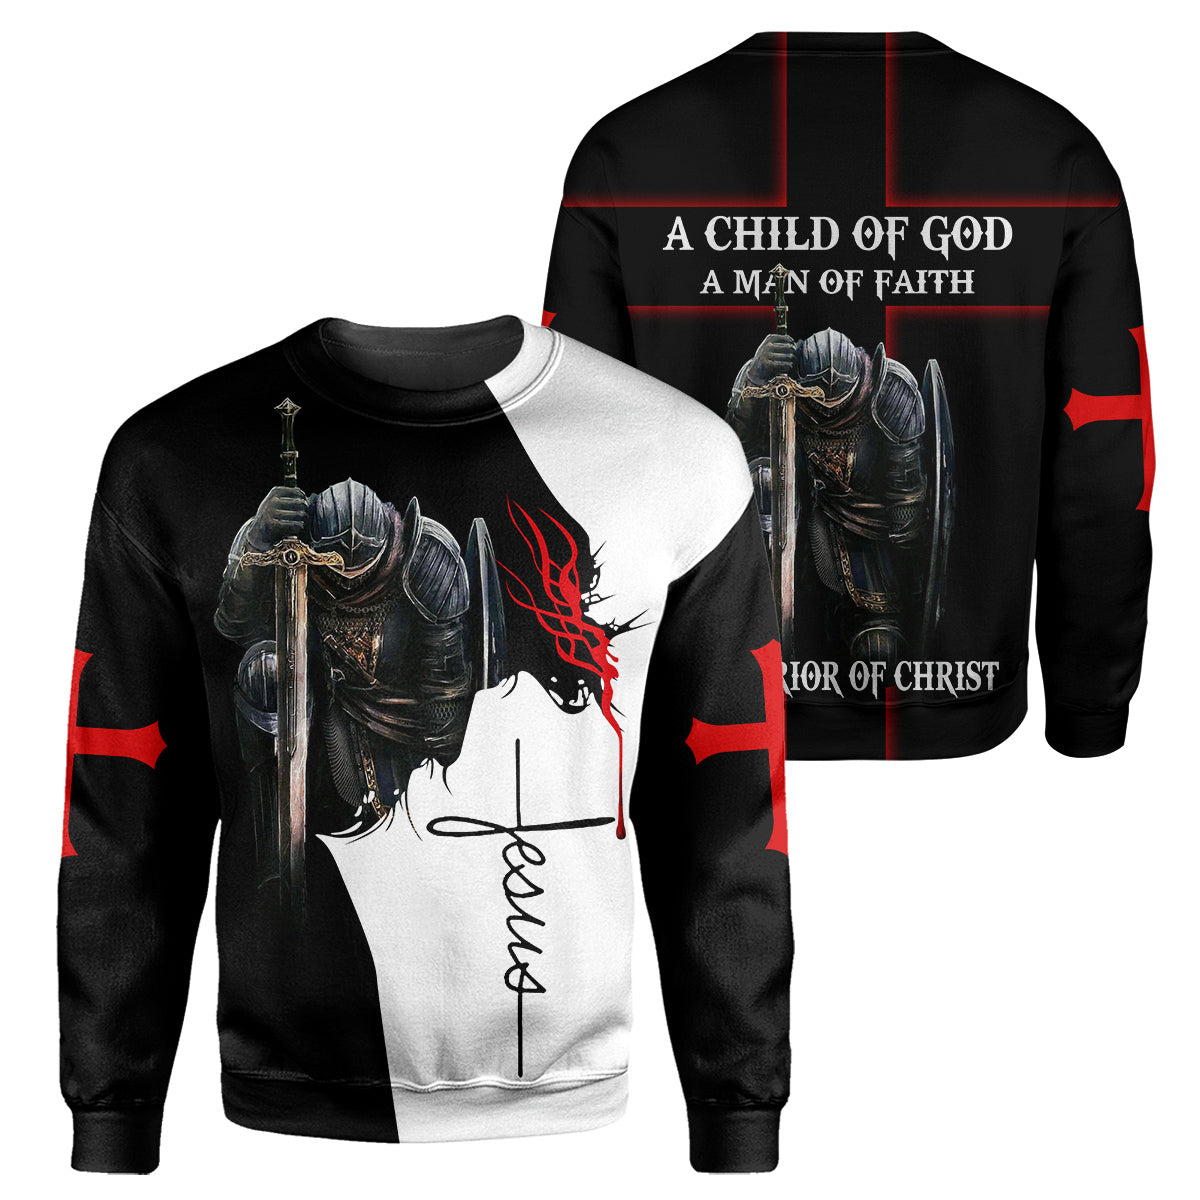 A Child Of God Unique All Over Print T-Shirt Hoodie Gift Ideas